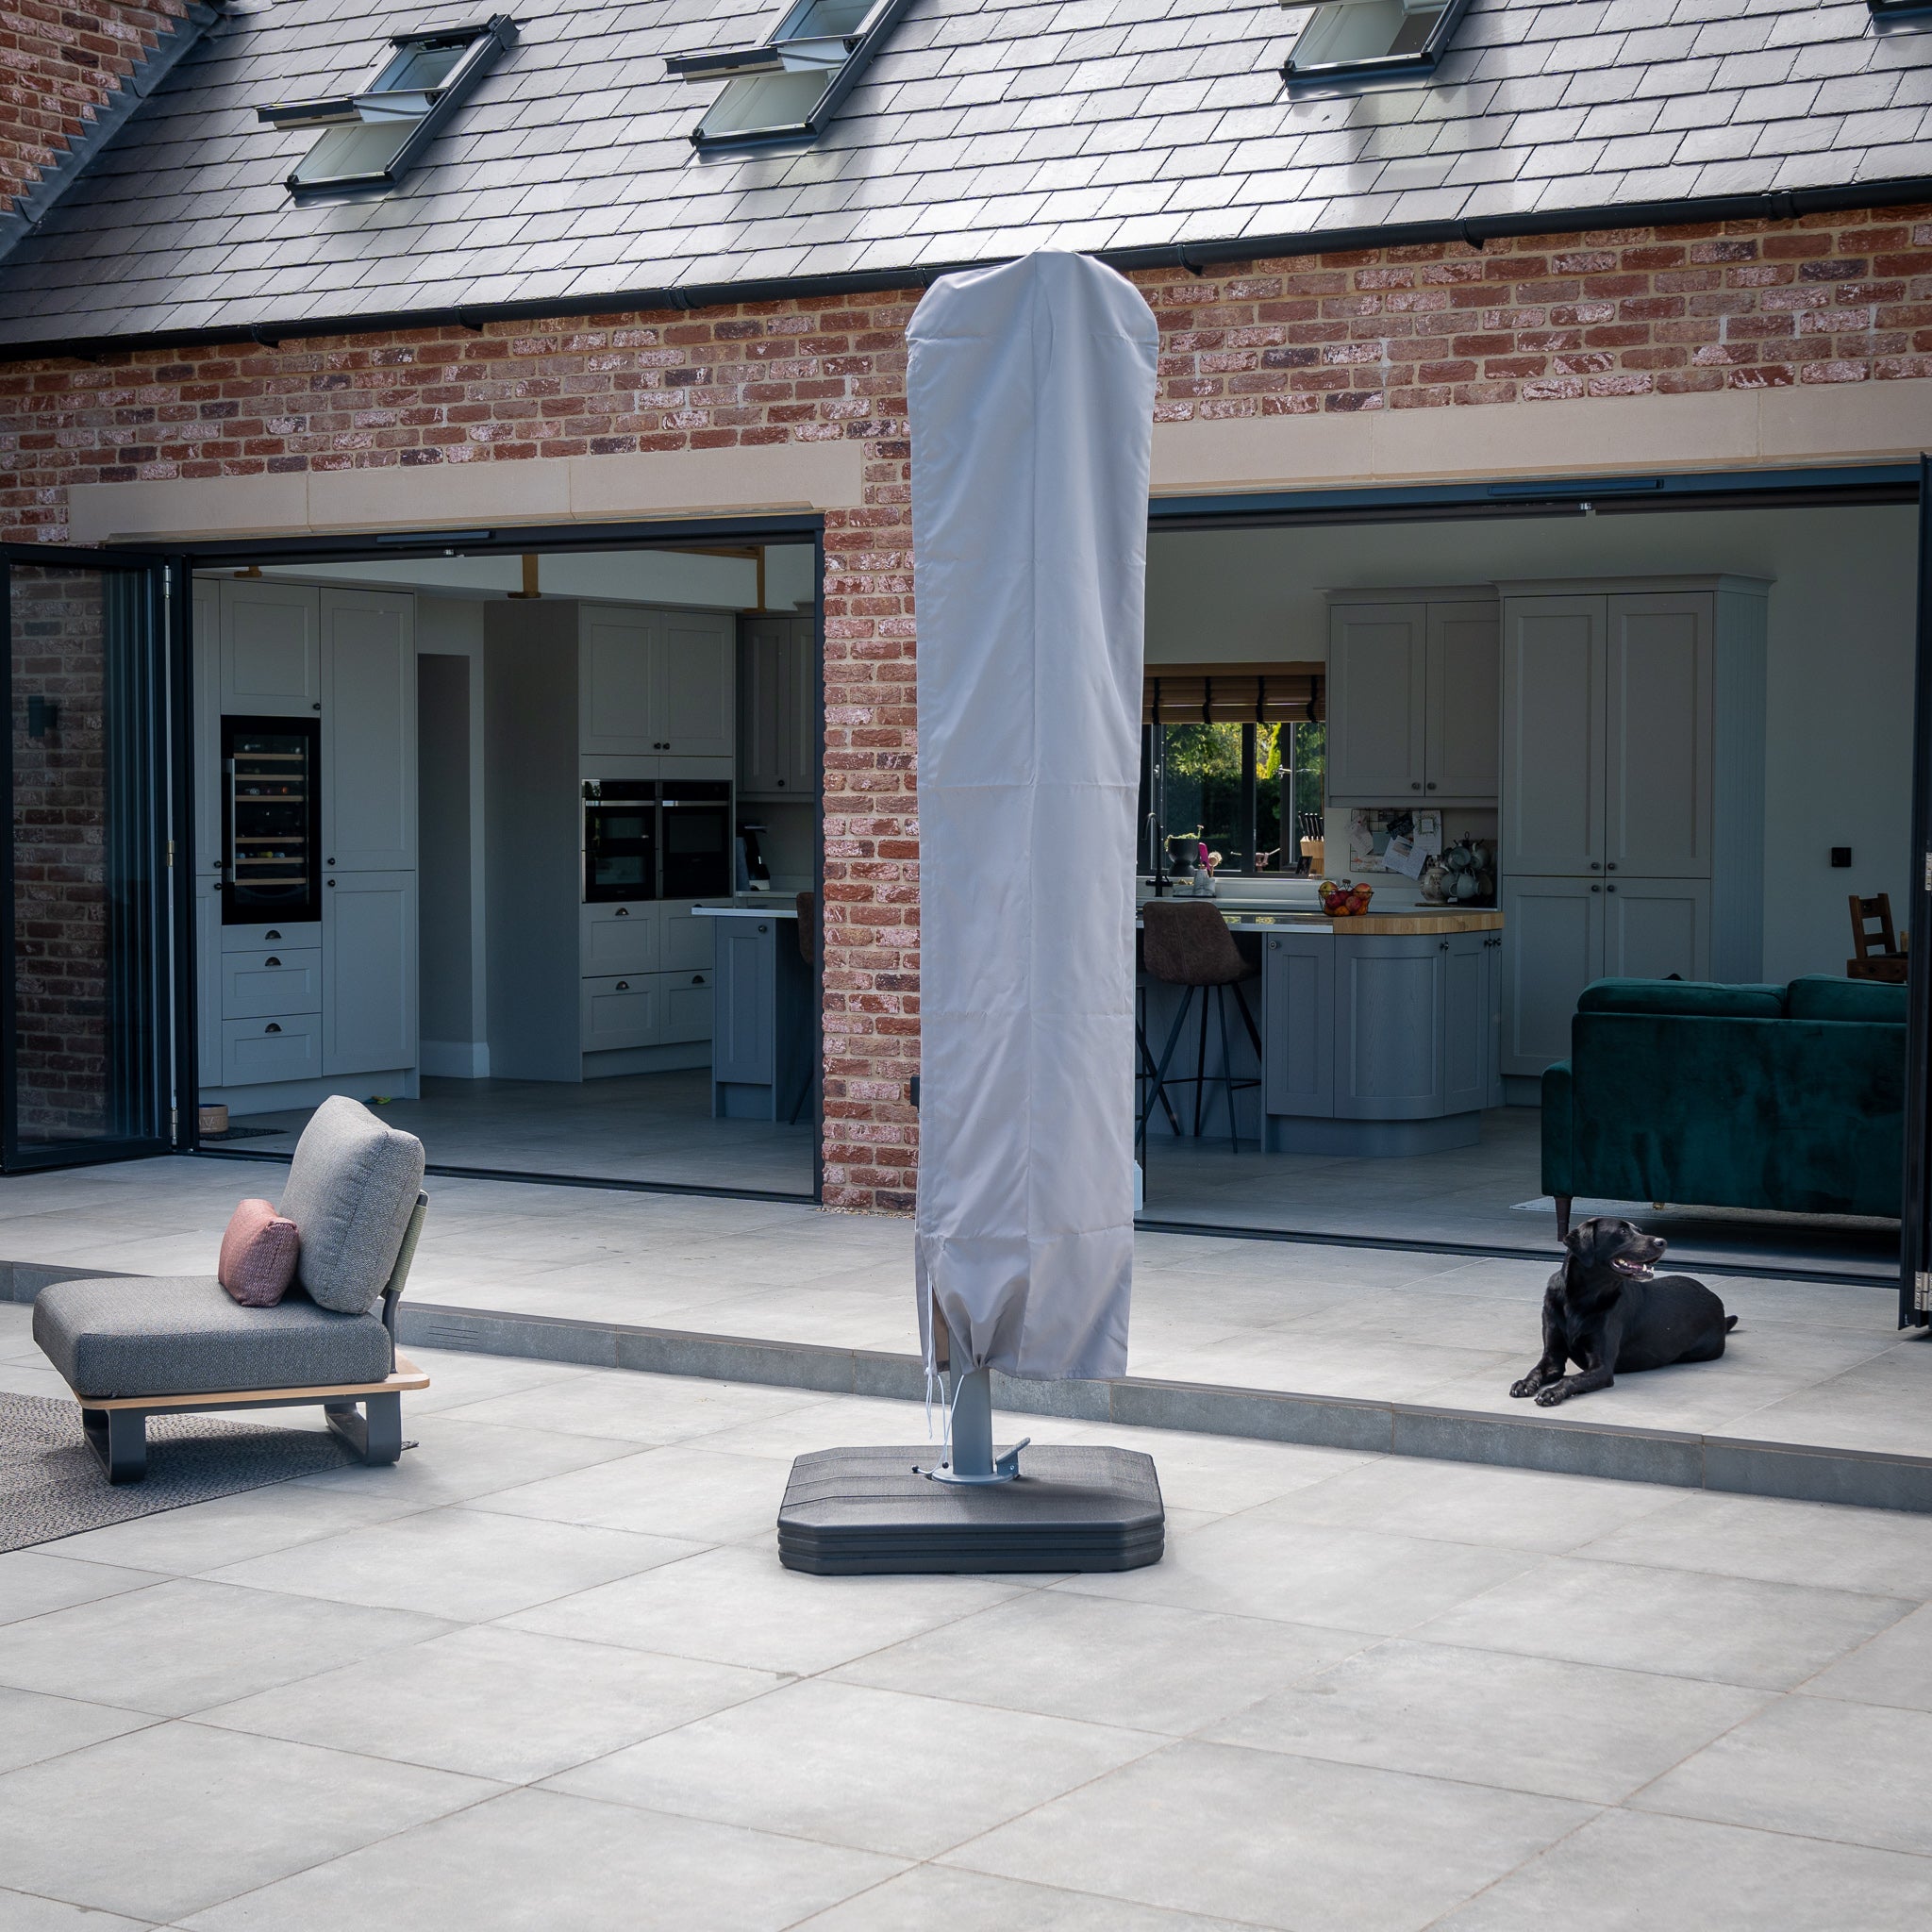 Ares 3m Square Cantilever Parasol with Solar powered LED Lights in Charcoal